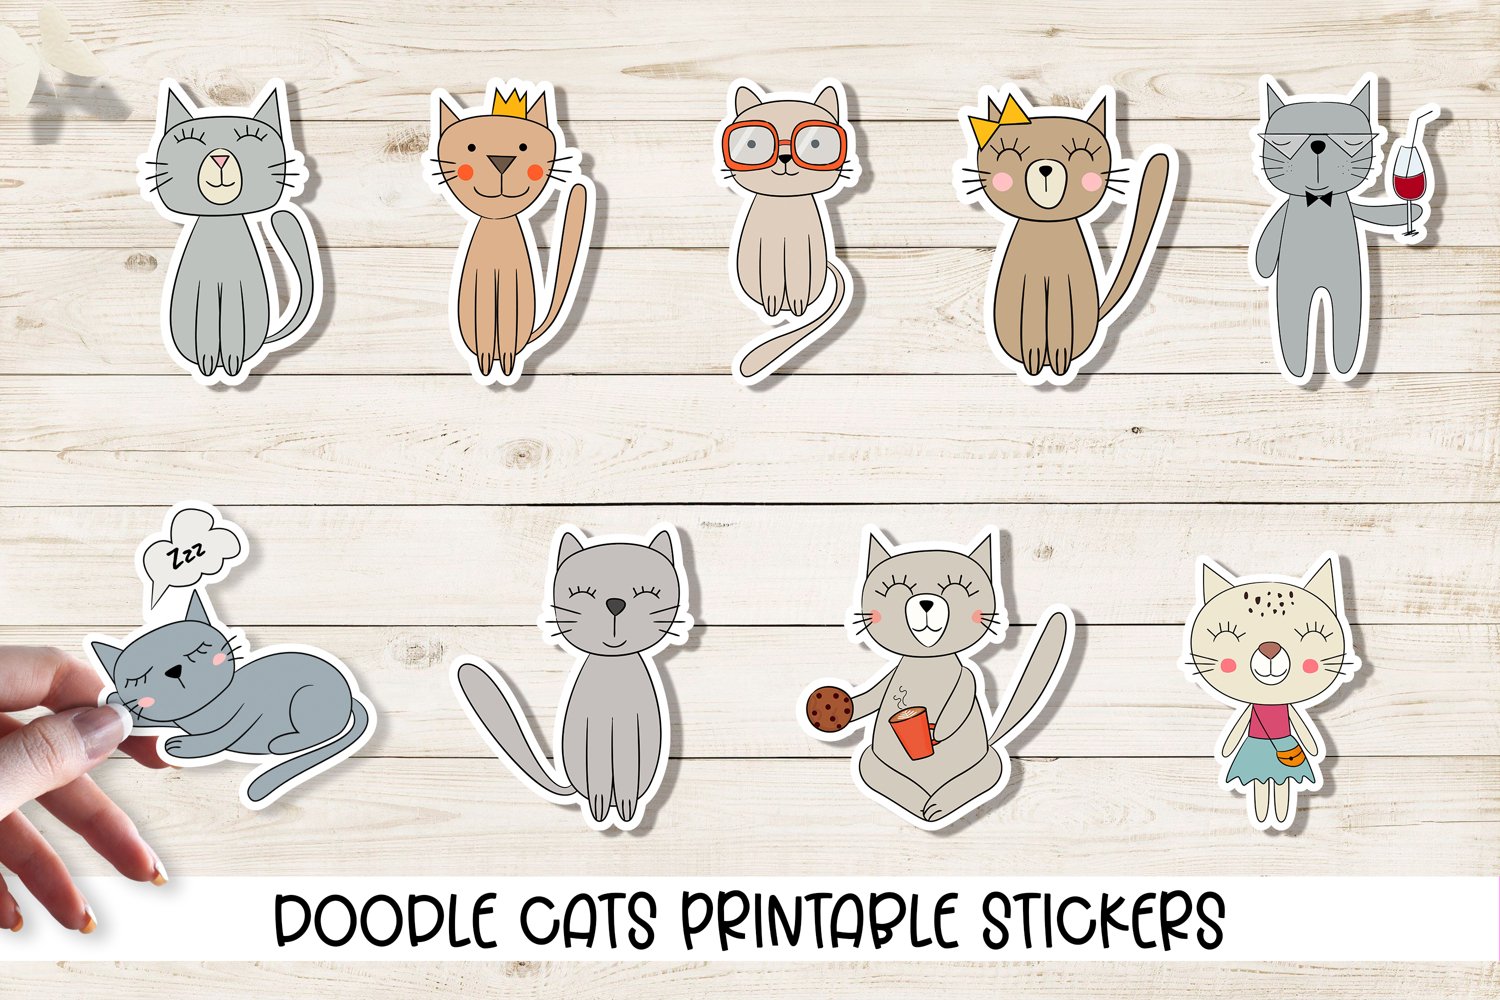 Doodle cats printable stickers.